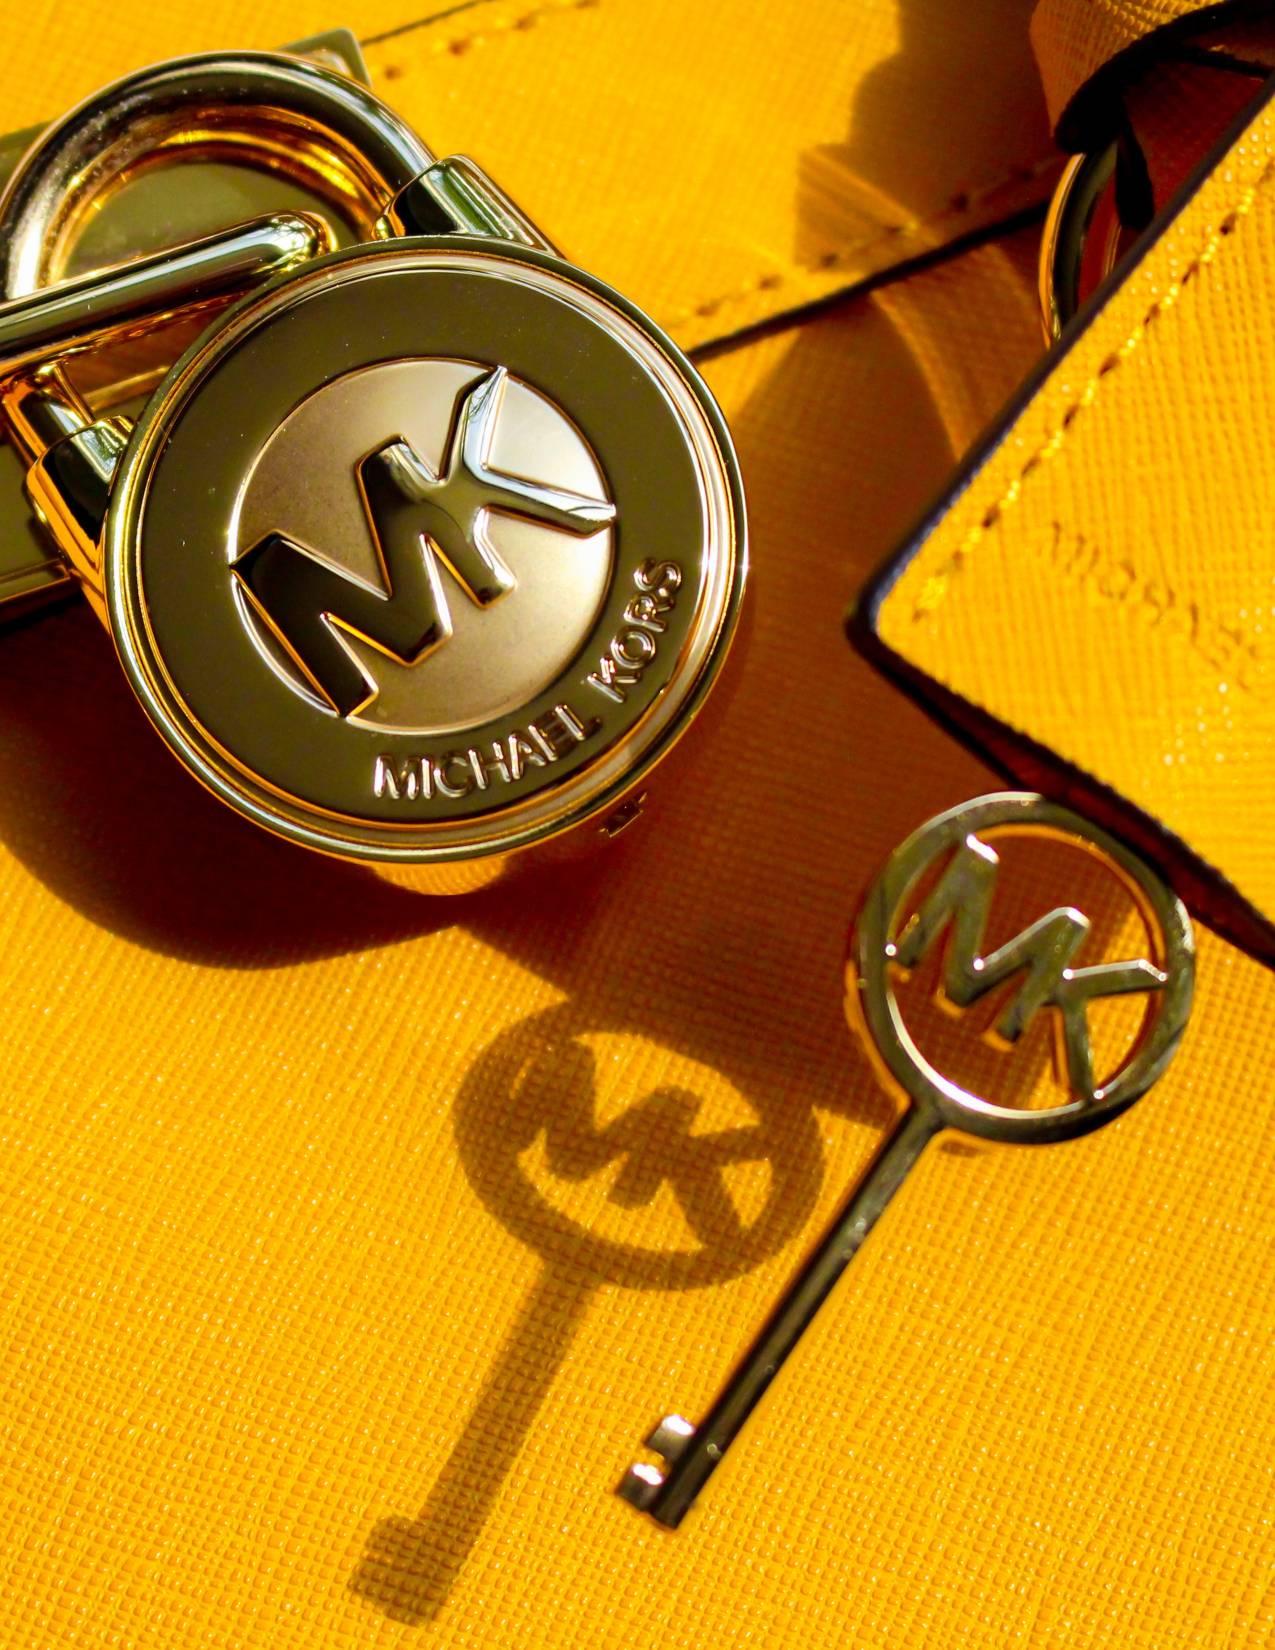 Keychains Michael Kors for women from a bag